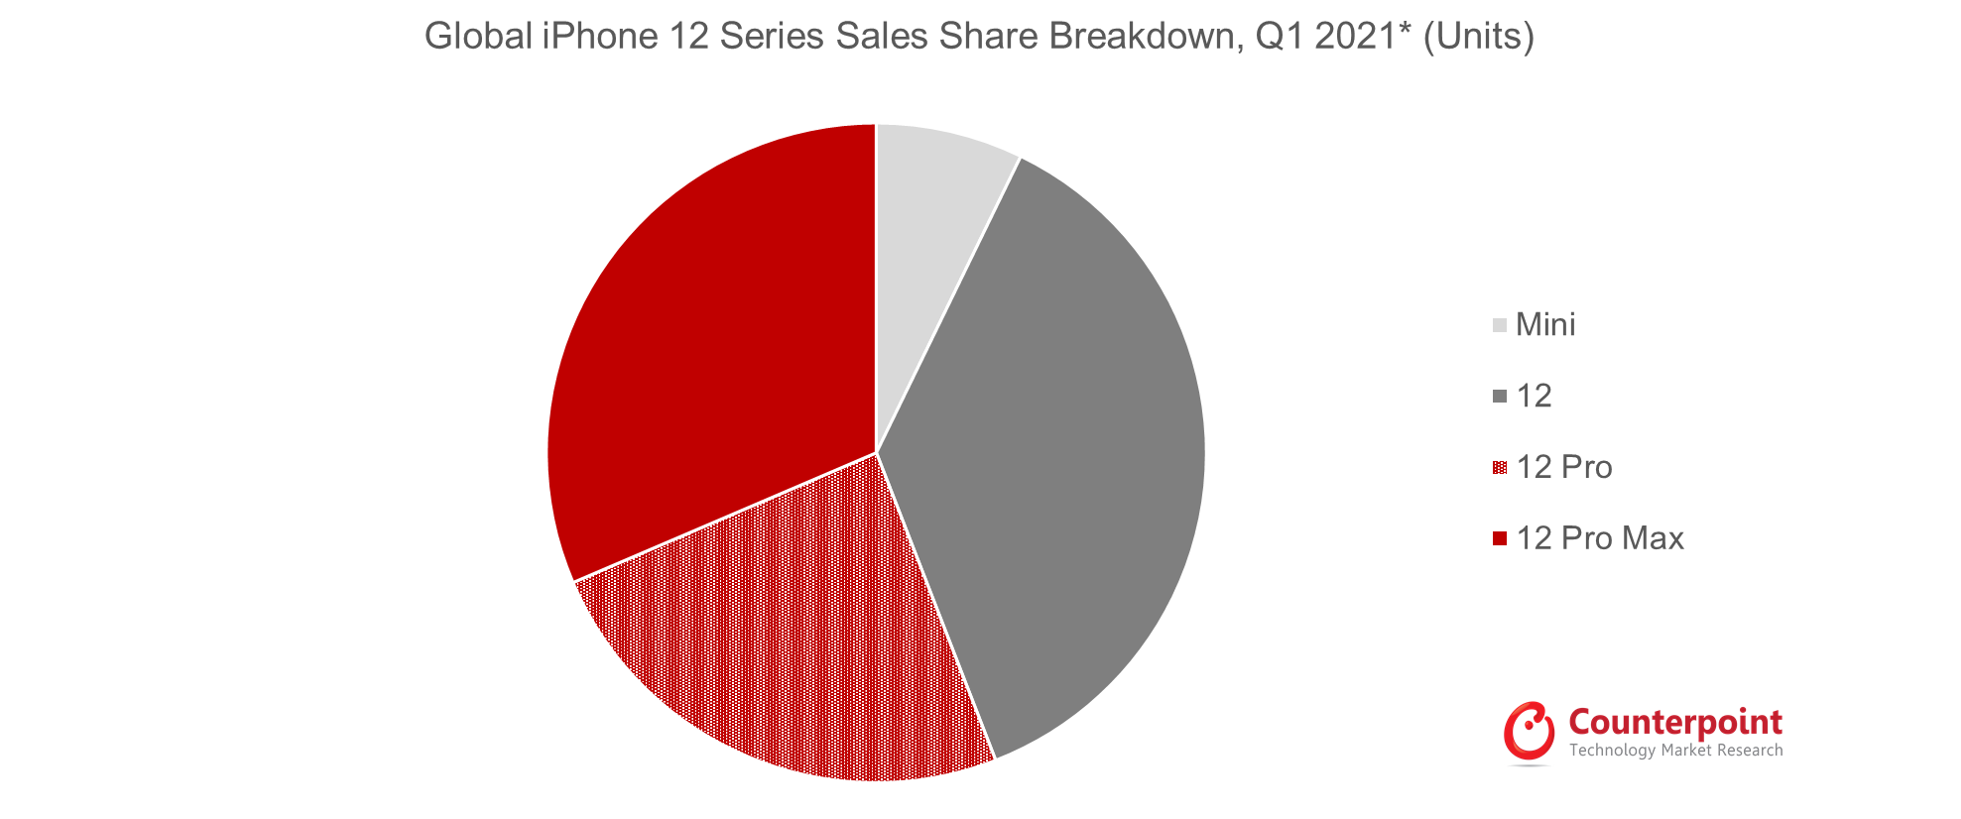 Counterpoint Research Global iPhone 12 Series Sales Share Breakdown